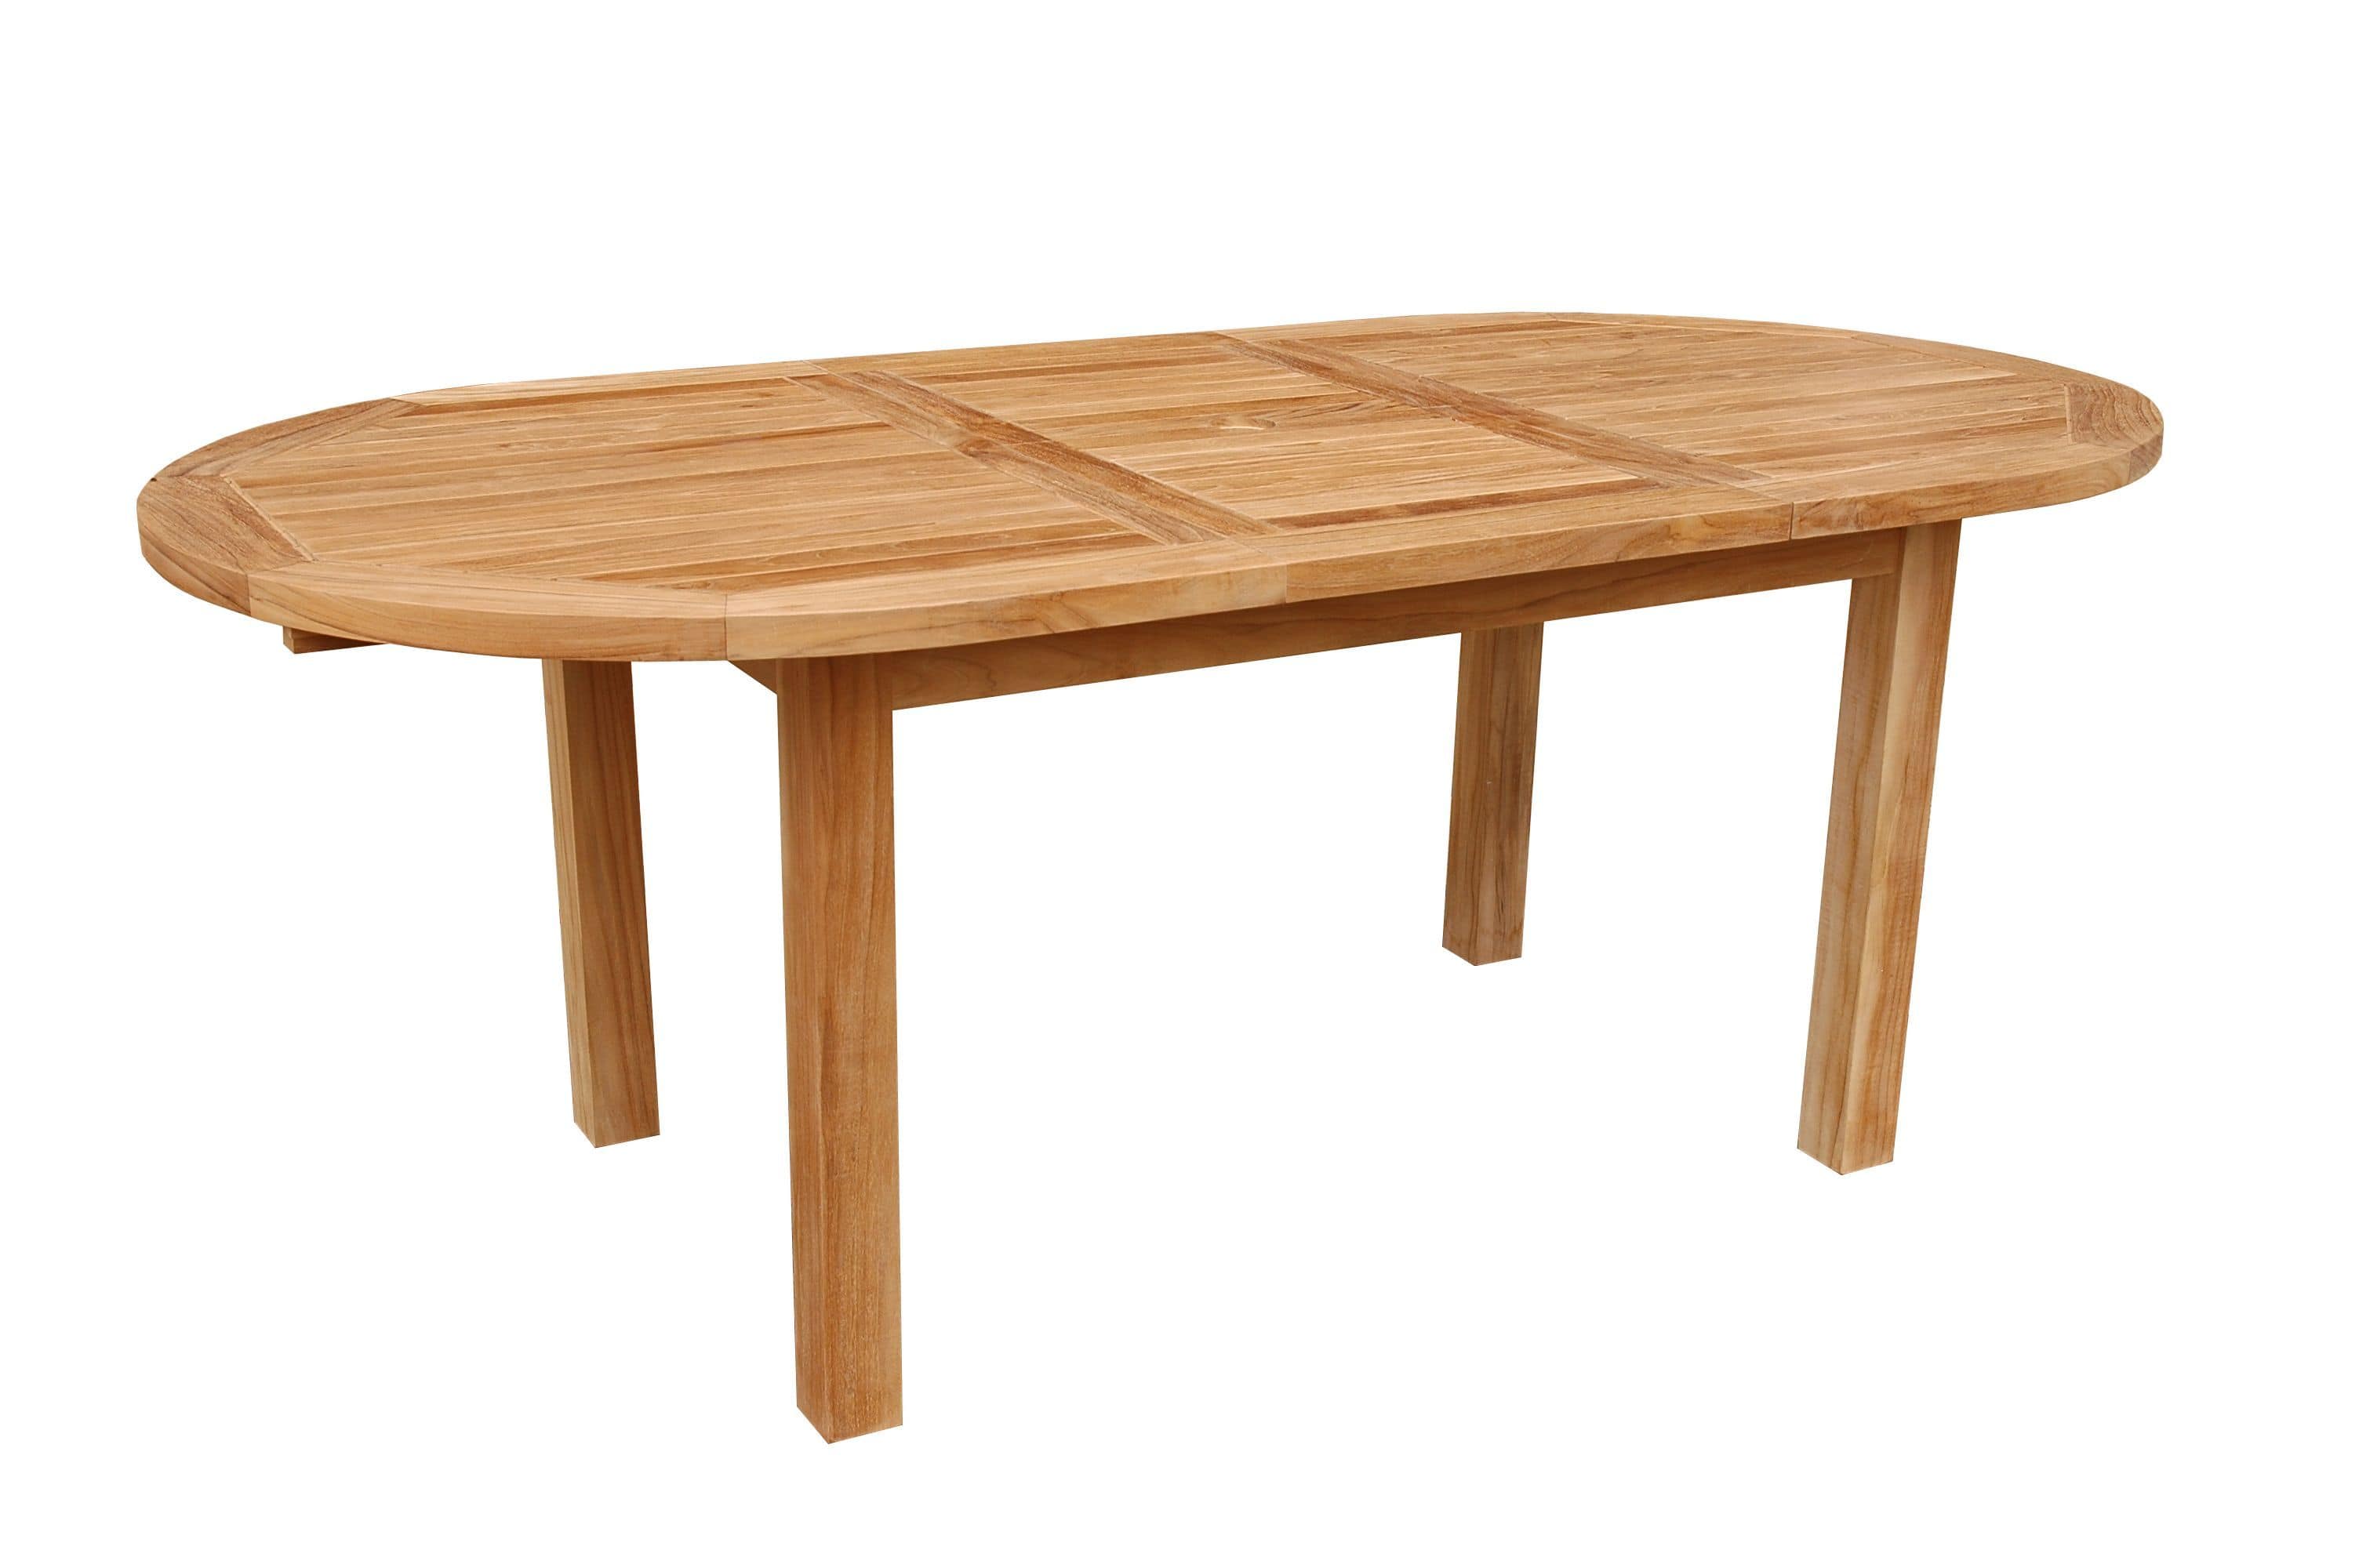 Anderson Teak Outdoor Table Anderson Teak Bahama 78" Oval Extension Table